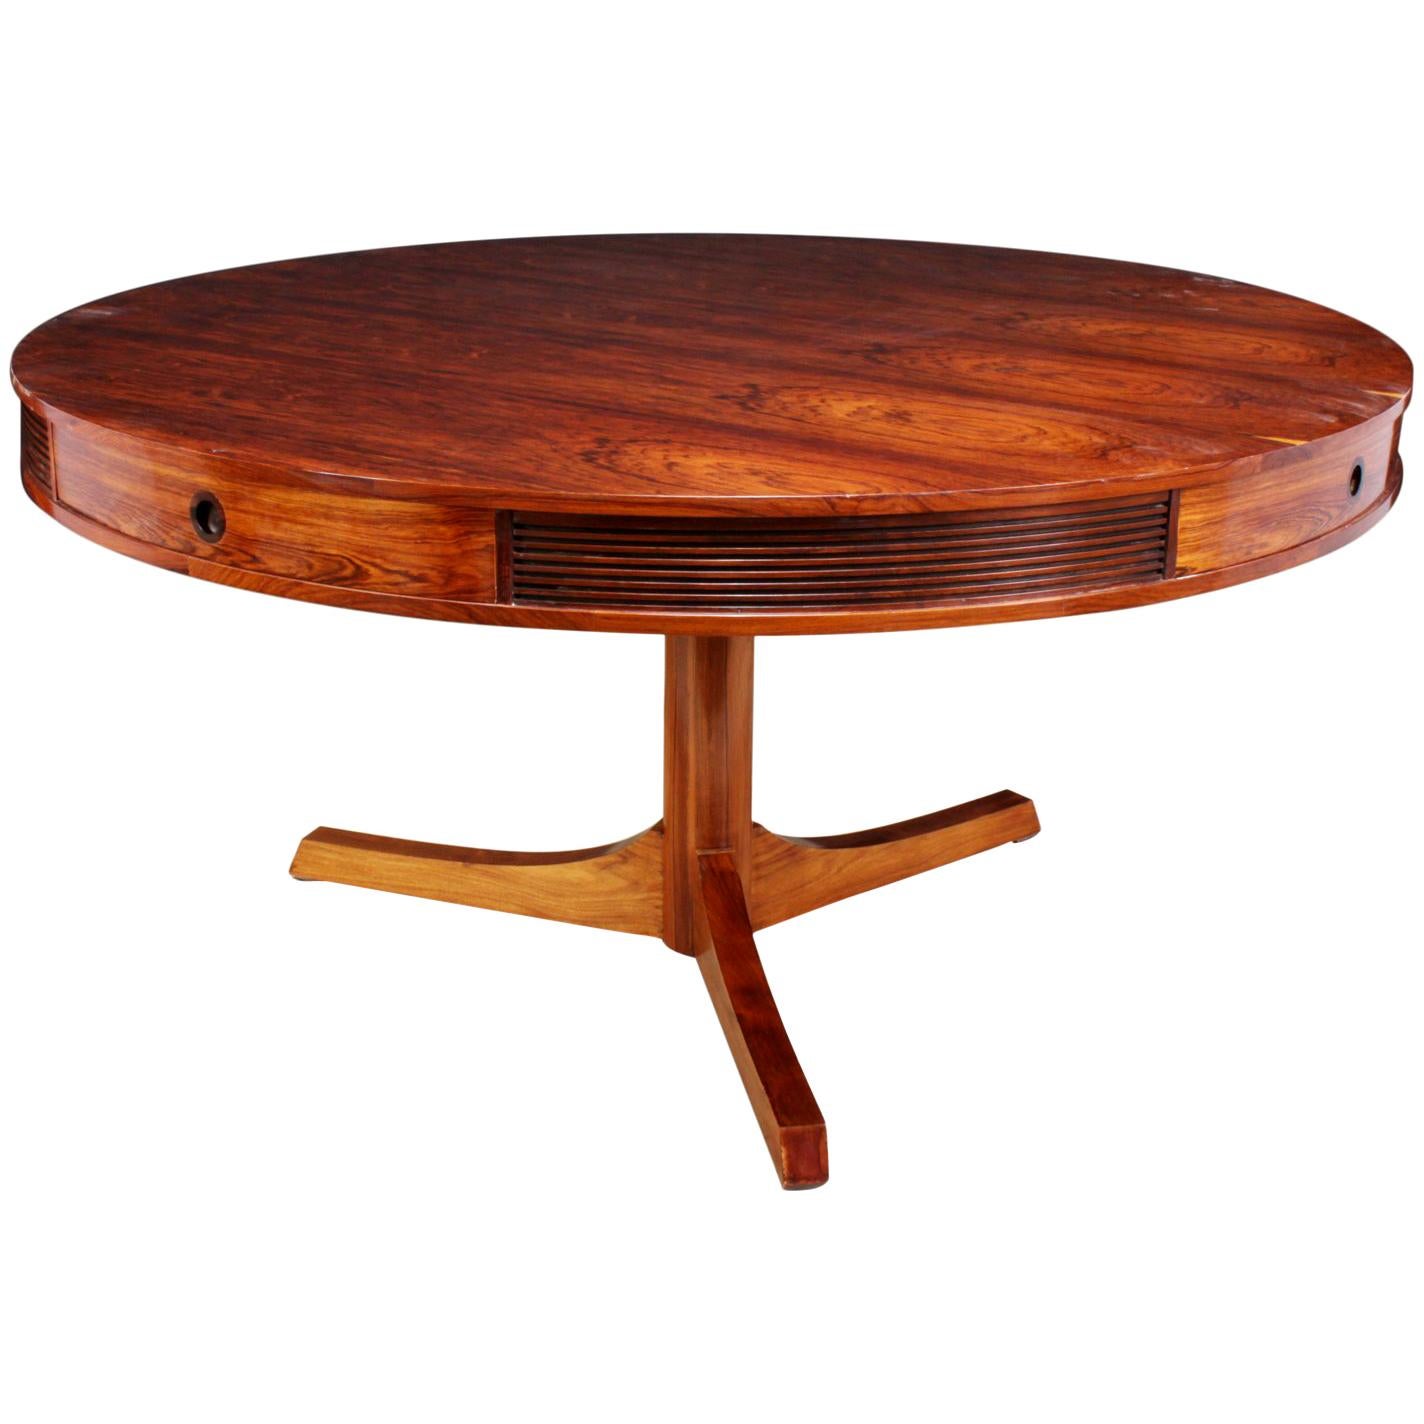 Rosewood Drum Table by Robert Heritage for Archie Shine, circa 1957